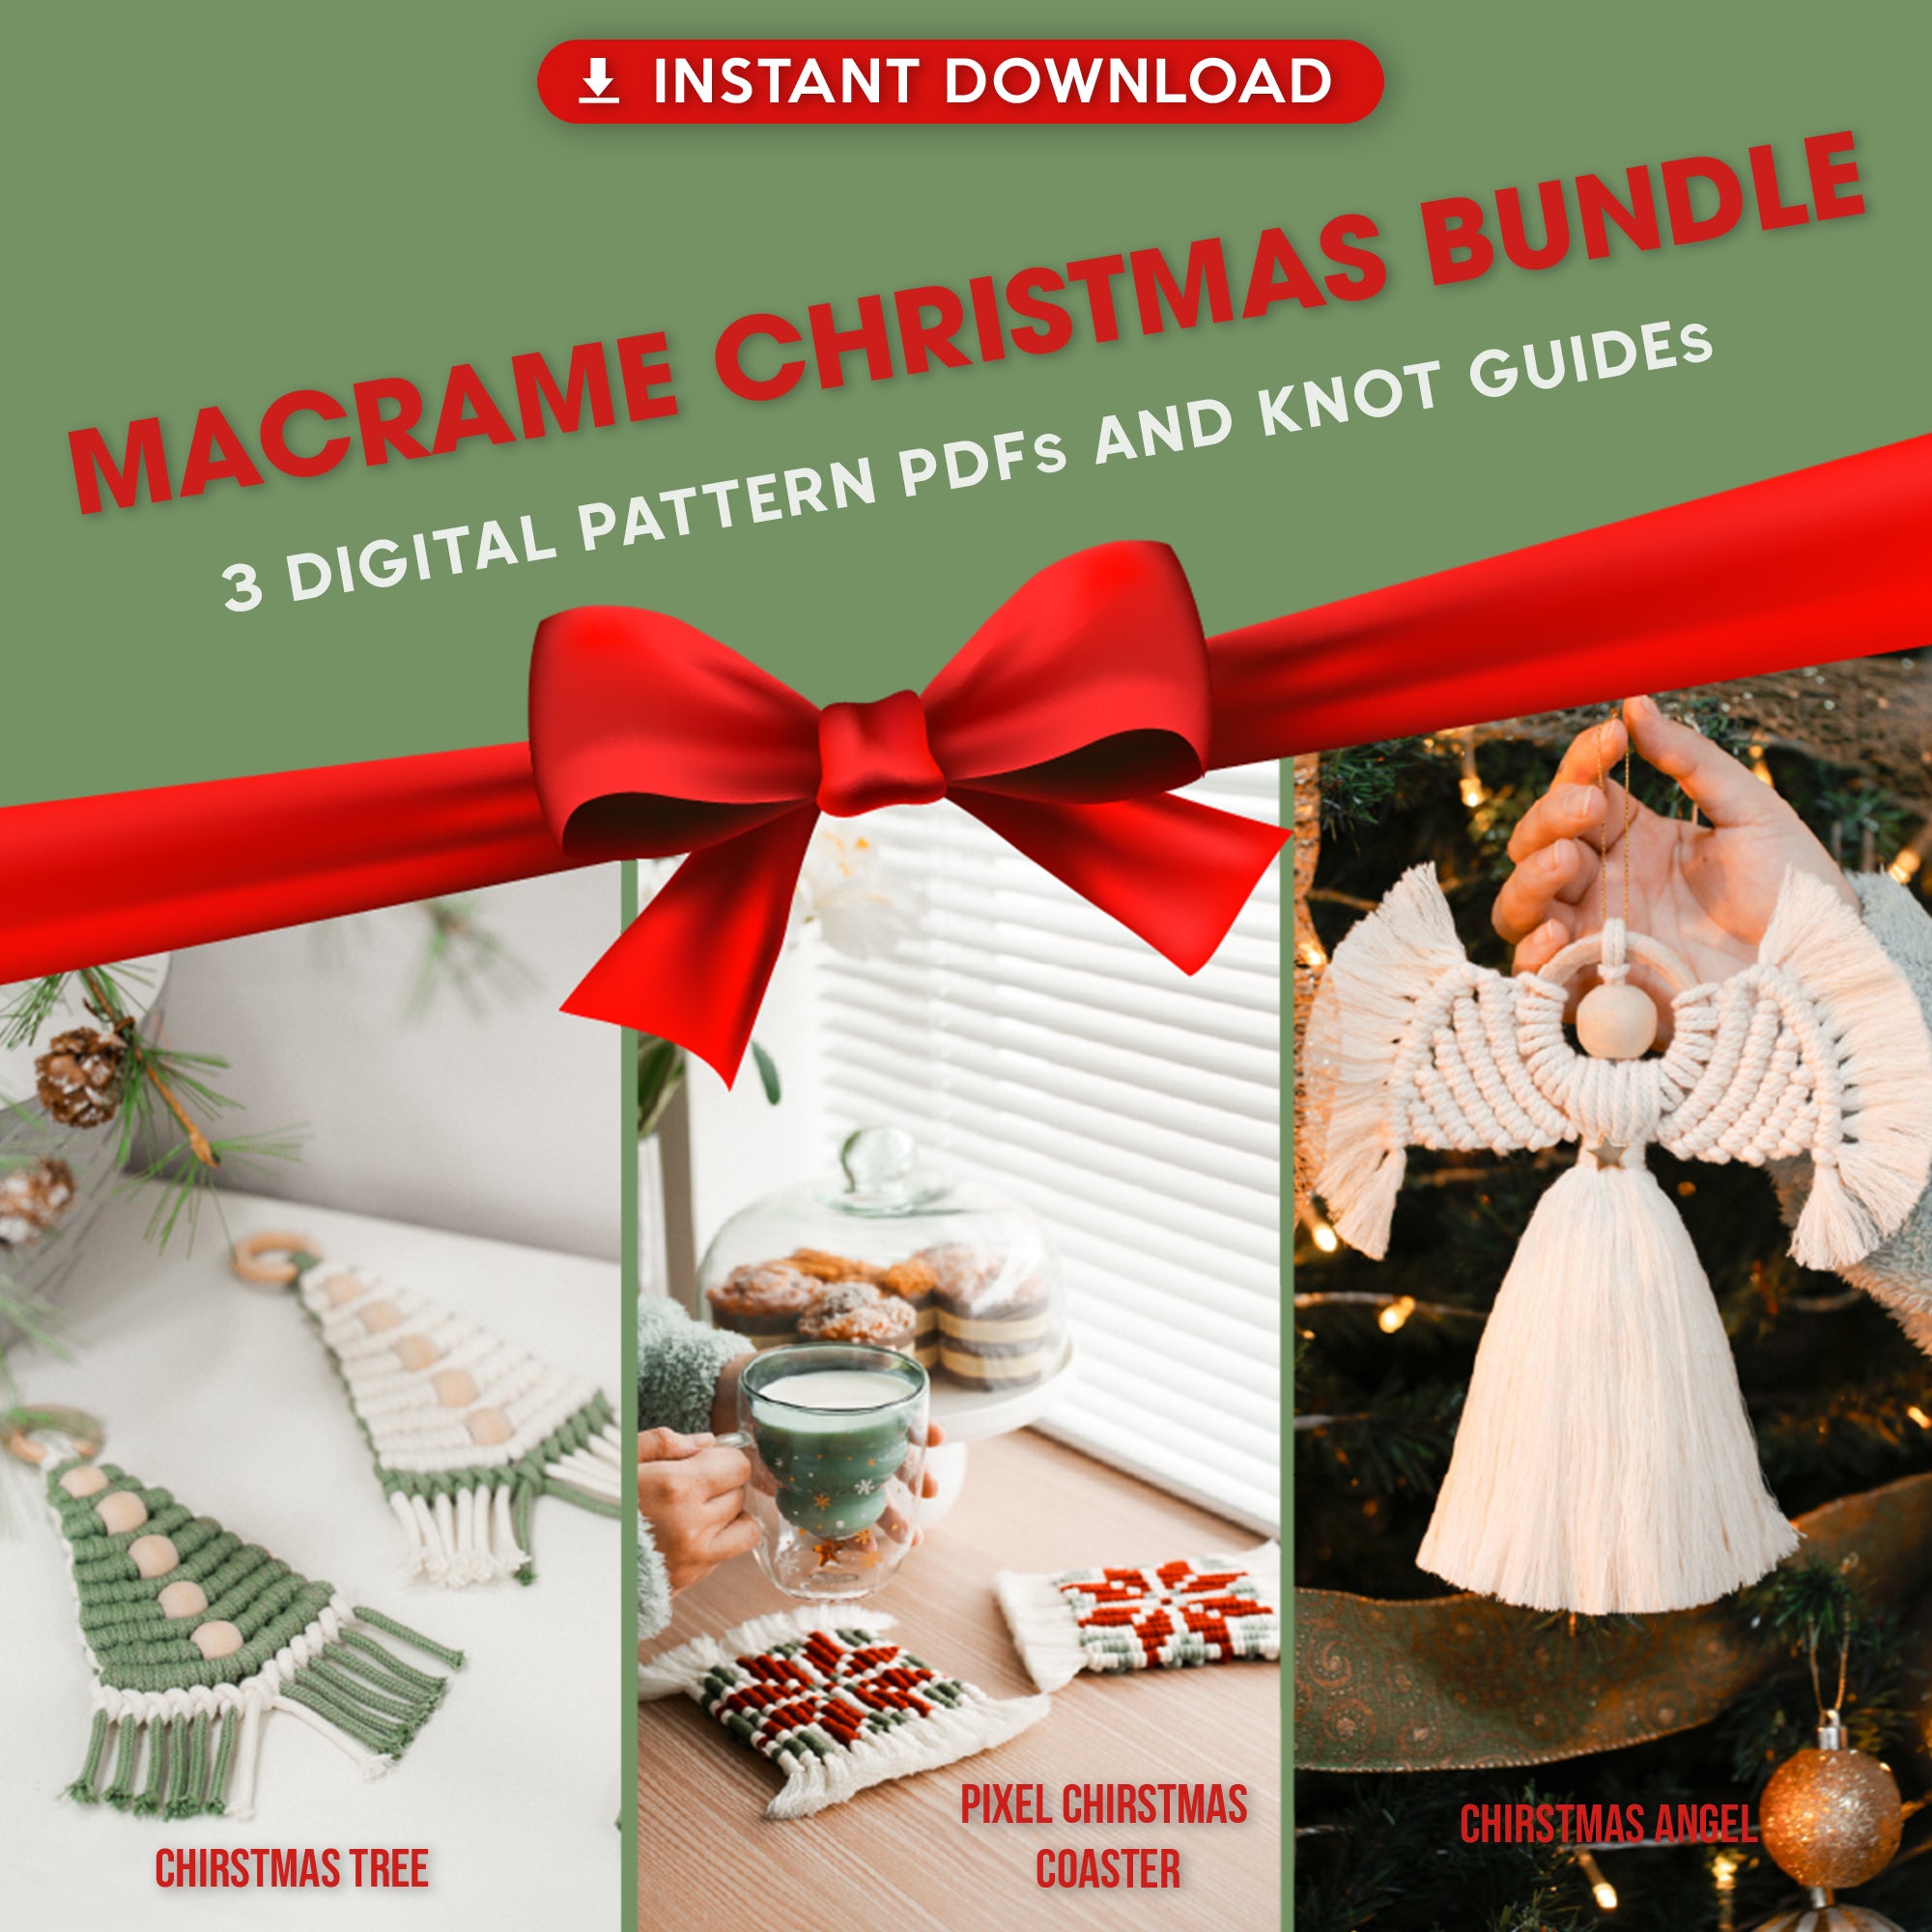 Macrame Christmas Bundle - 3 Digital PDFs and Knot Guides